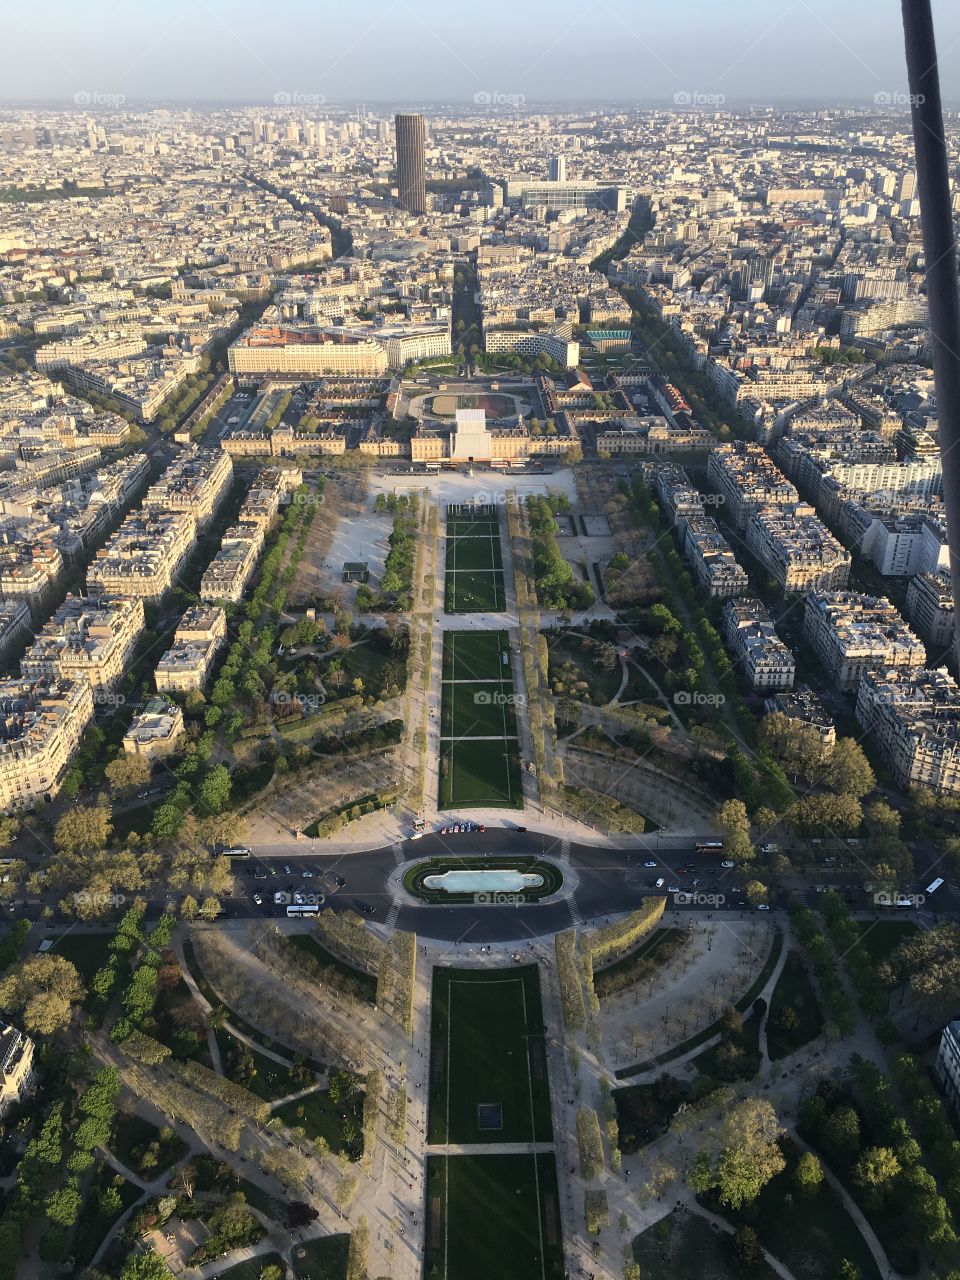 Paris from the Eiffel Tower, stunning views of such a beautiful city 